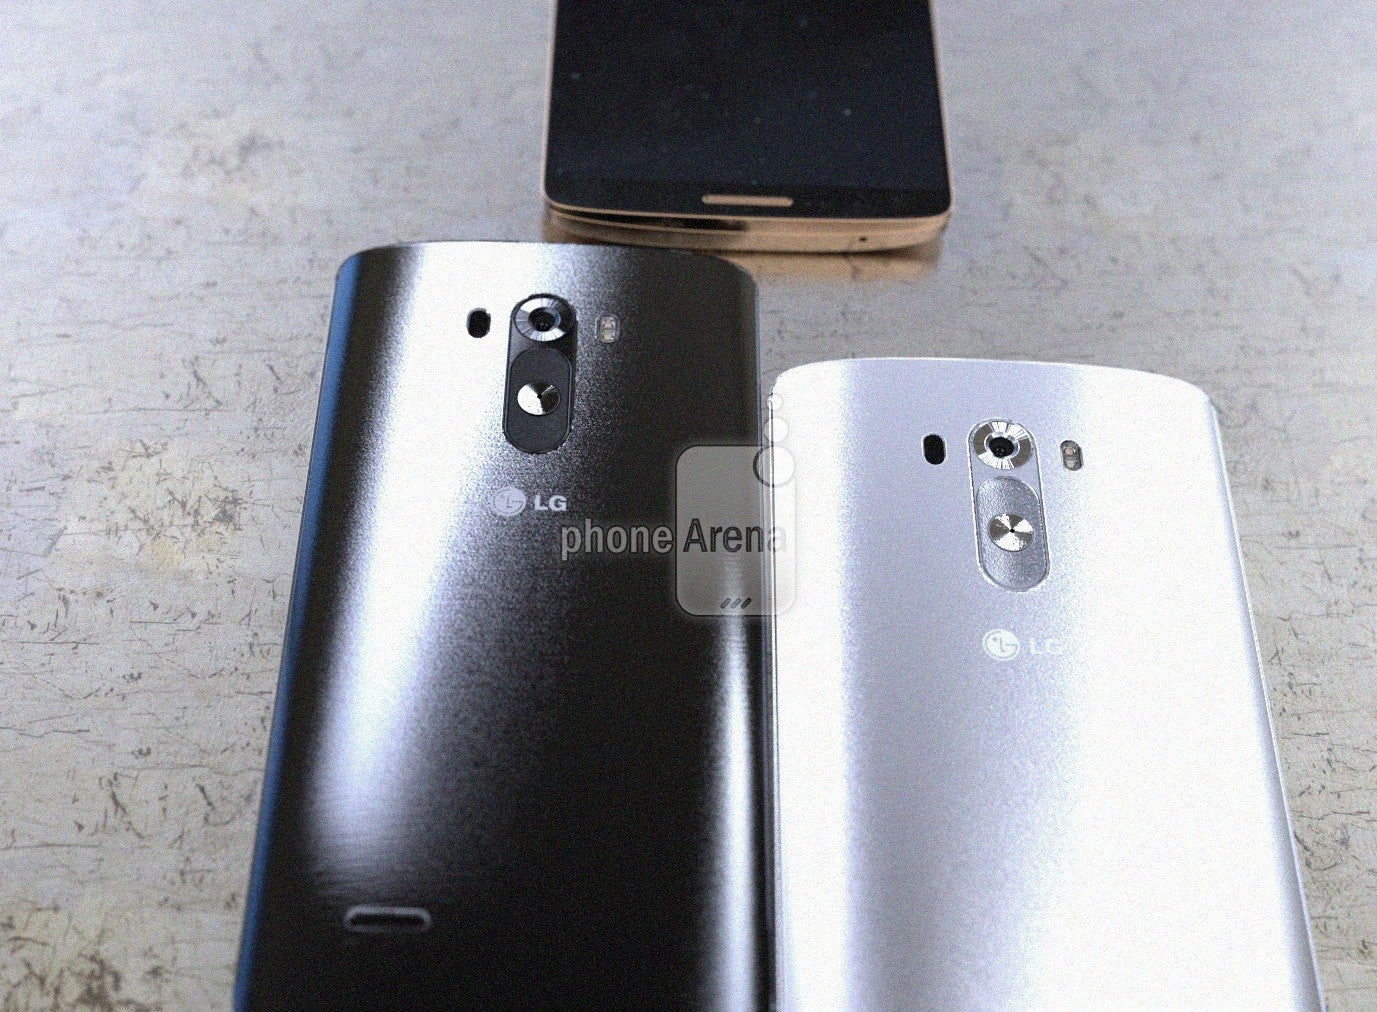 A new image leak of the LG G3 shows off the brushed effect black and white back plates